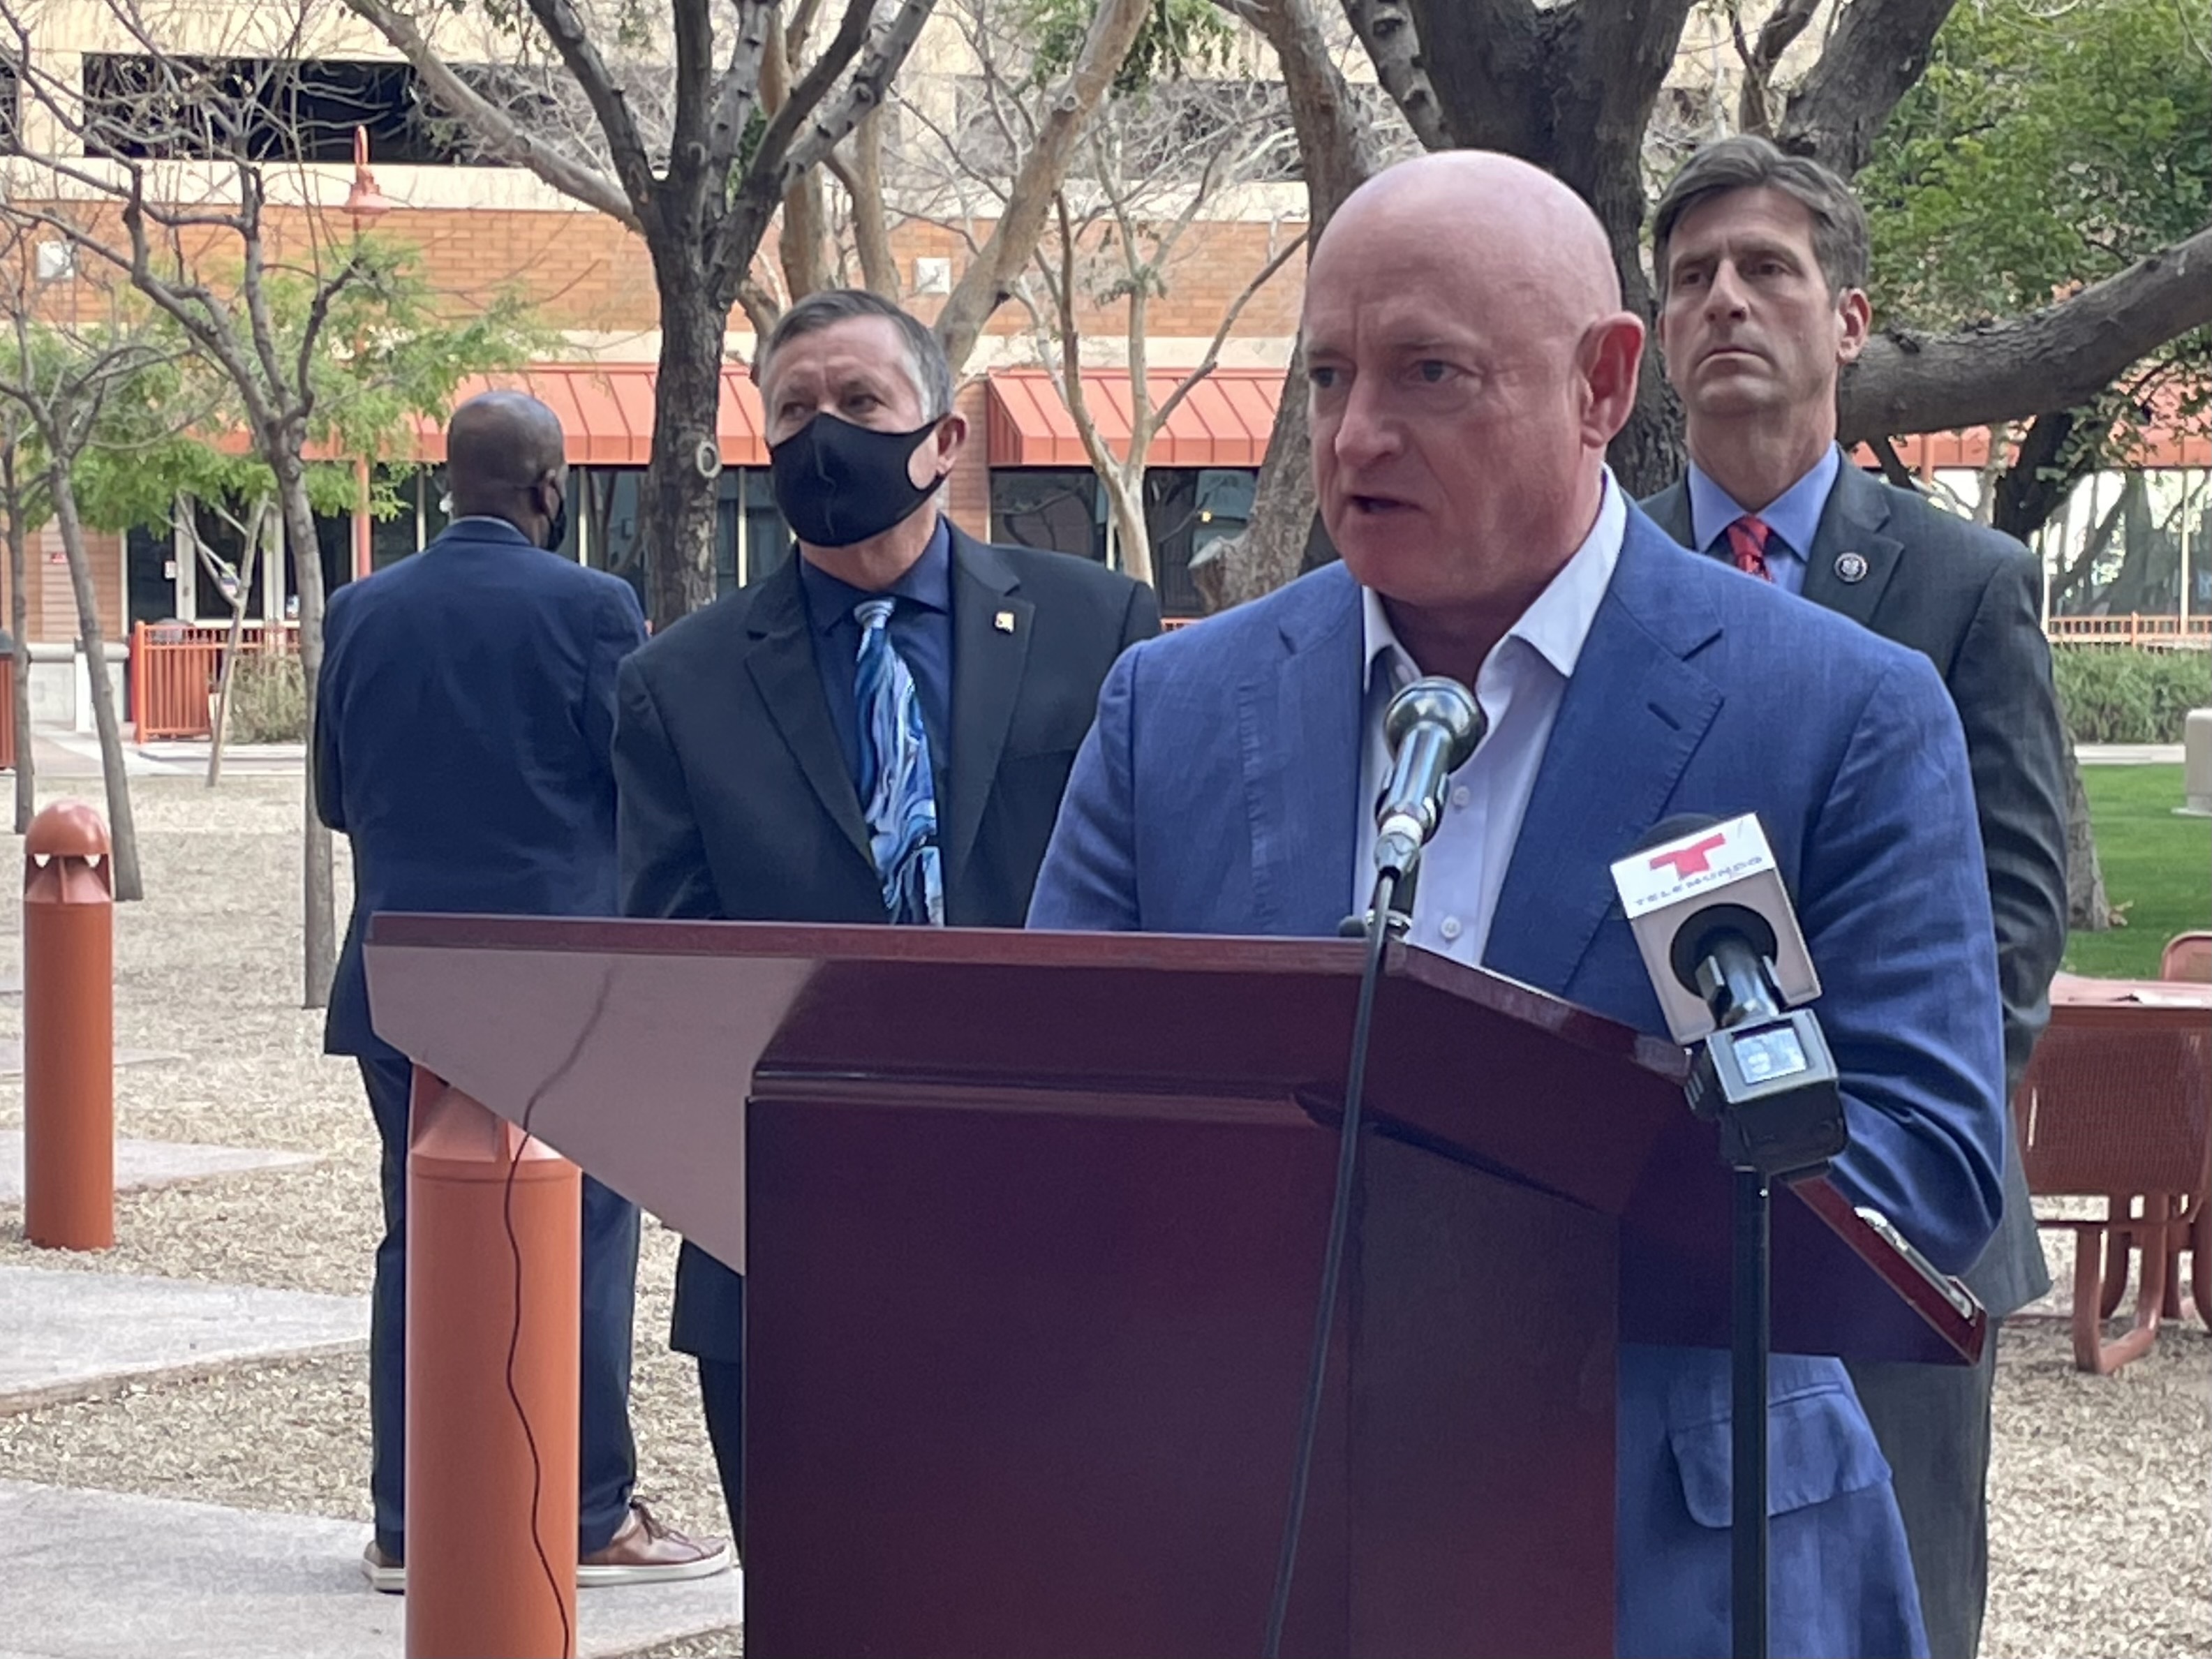 Senator Mark Kelly speaks at press conference with U.S. Secretary of the Interior Deb Haaland on Infrastructure Act funds in Phoenix on February 22, 2022. 